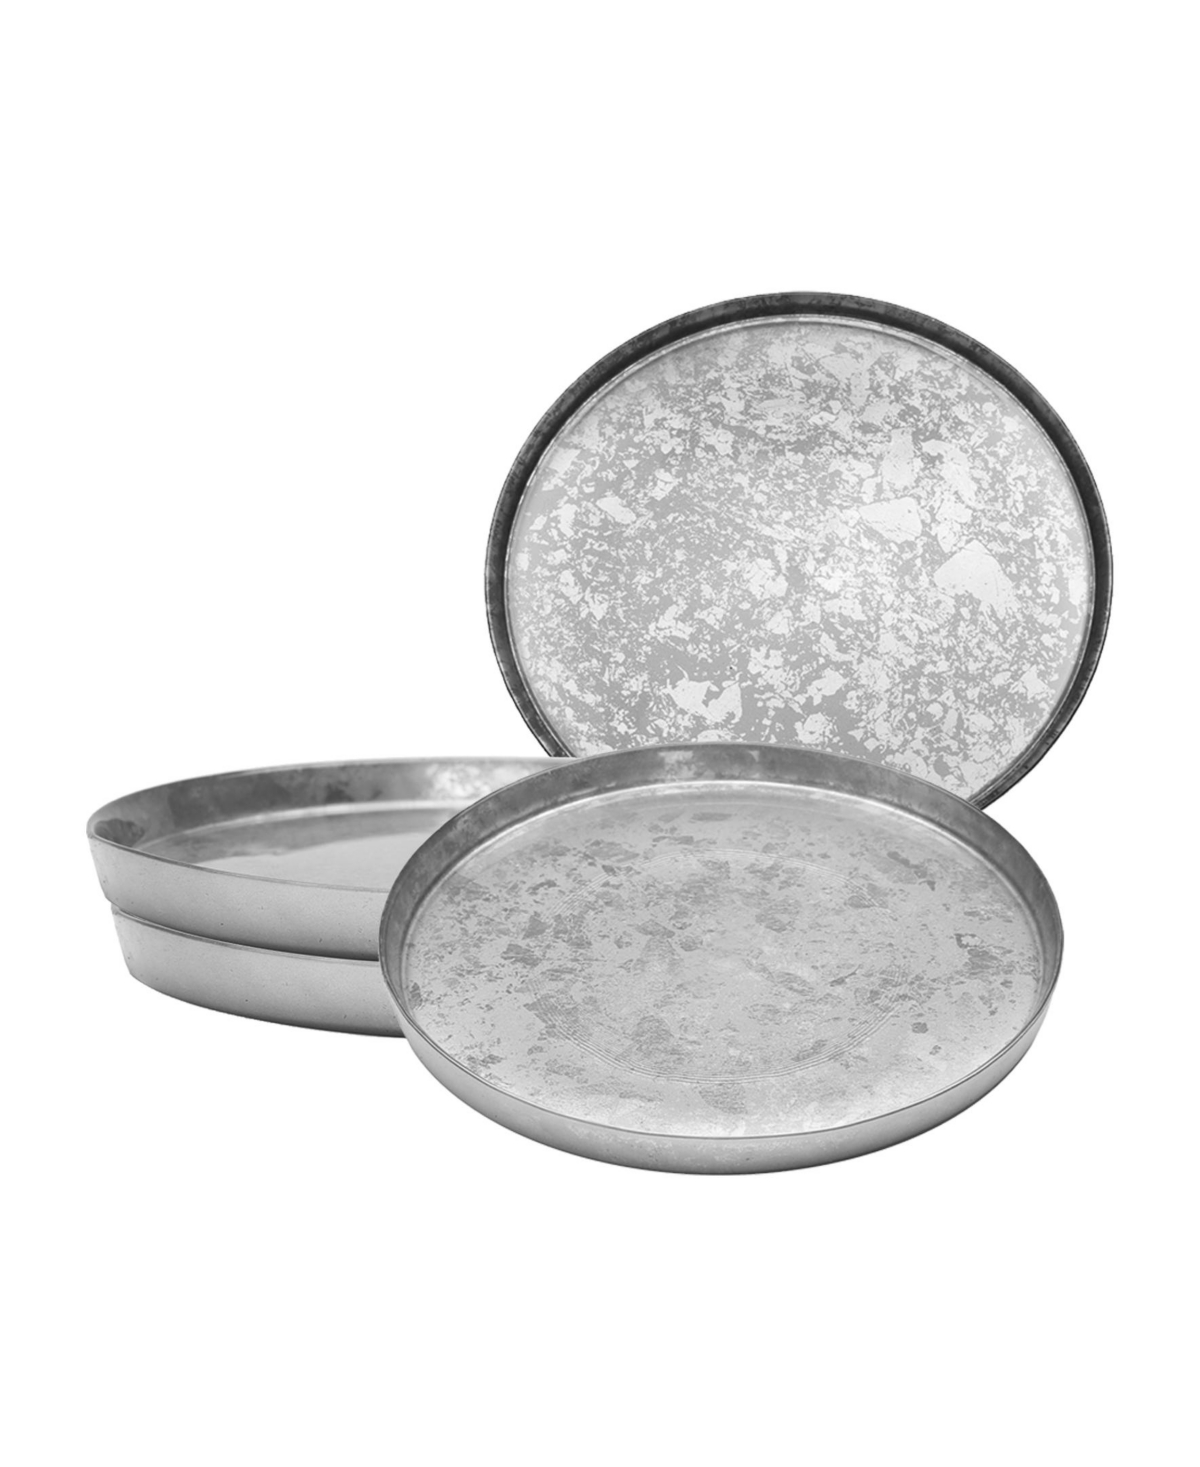 8.25" Silver Glitter Salad Plates with Raised Rim 4 Piece Set, Service for 4 - Silver